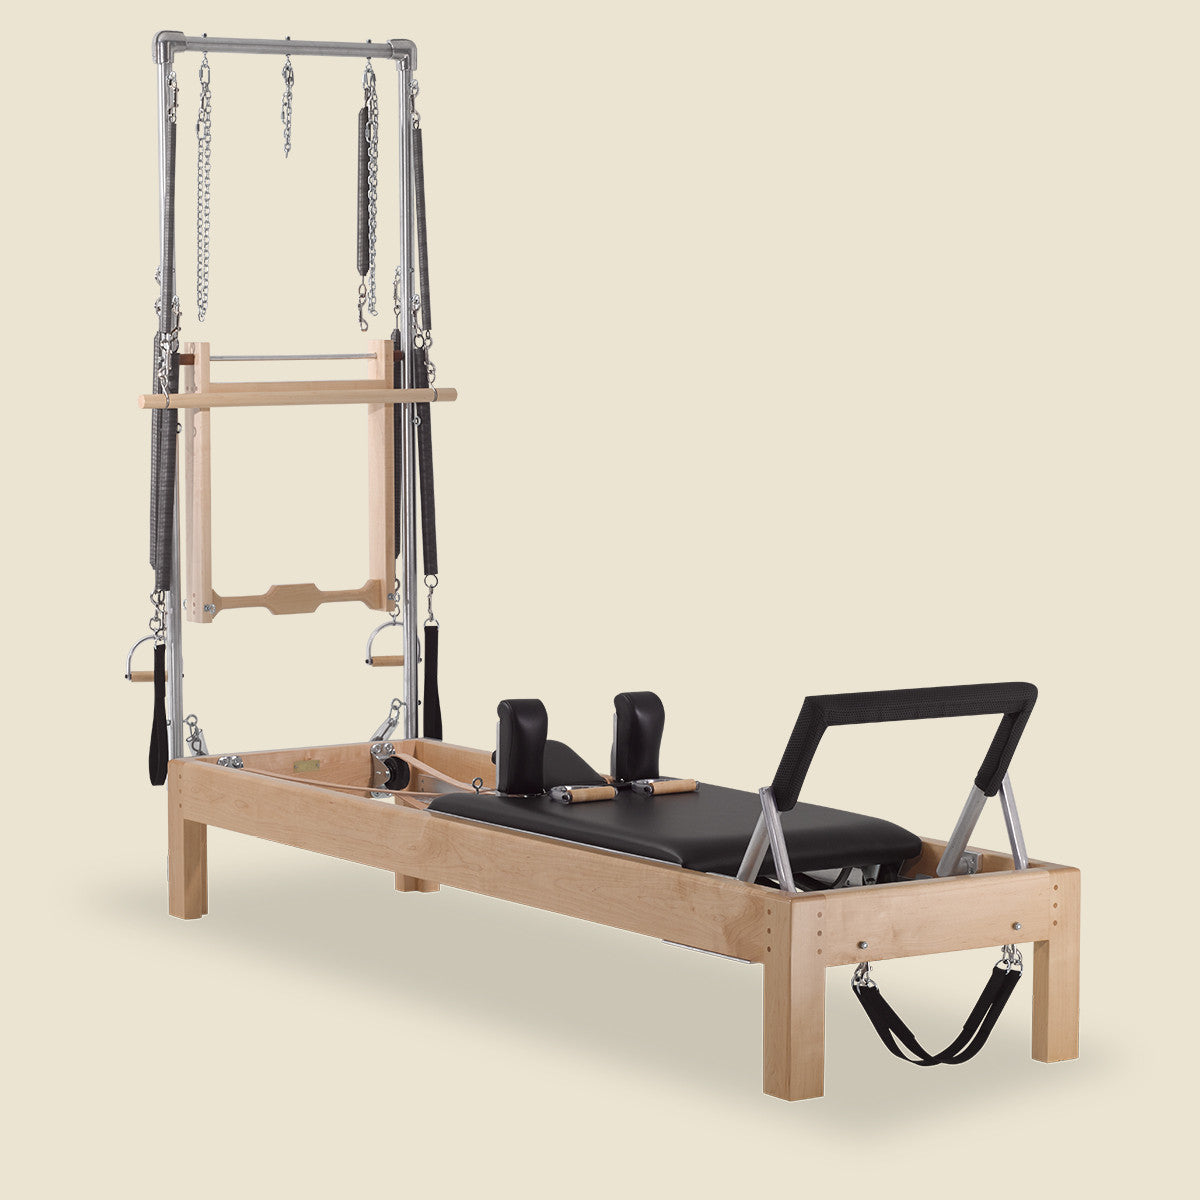 About the Pilates Reformer